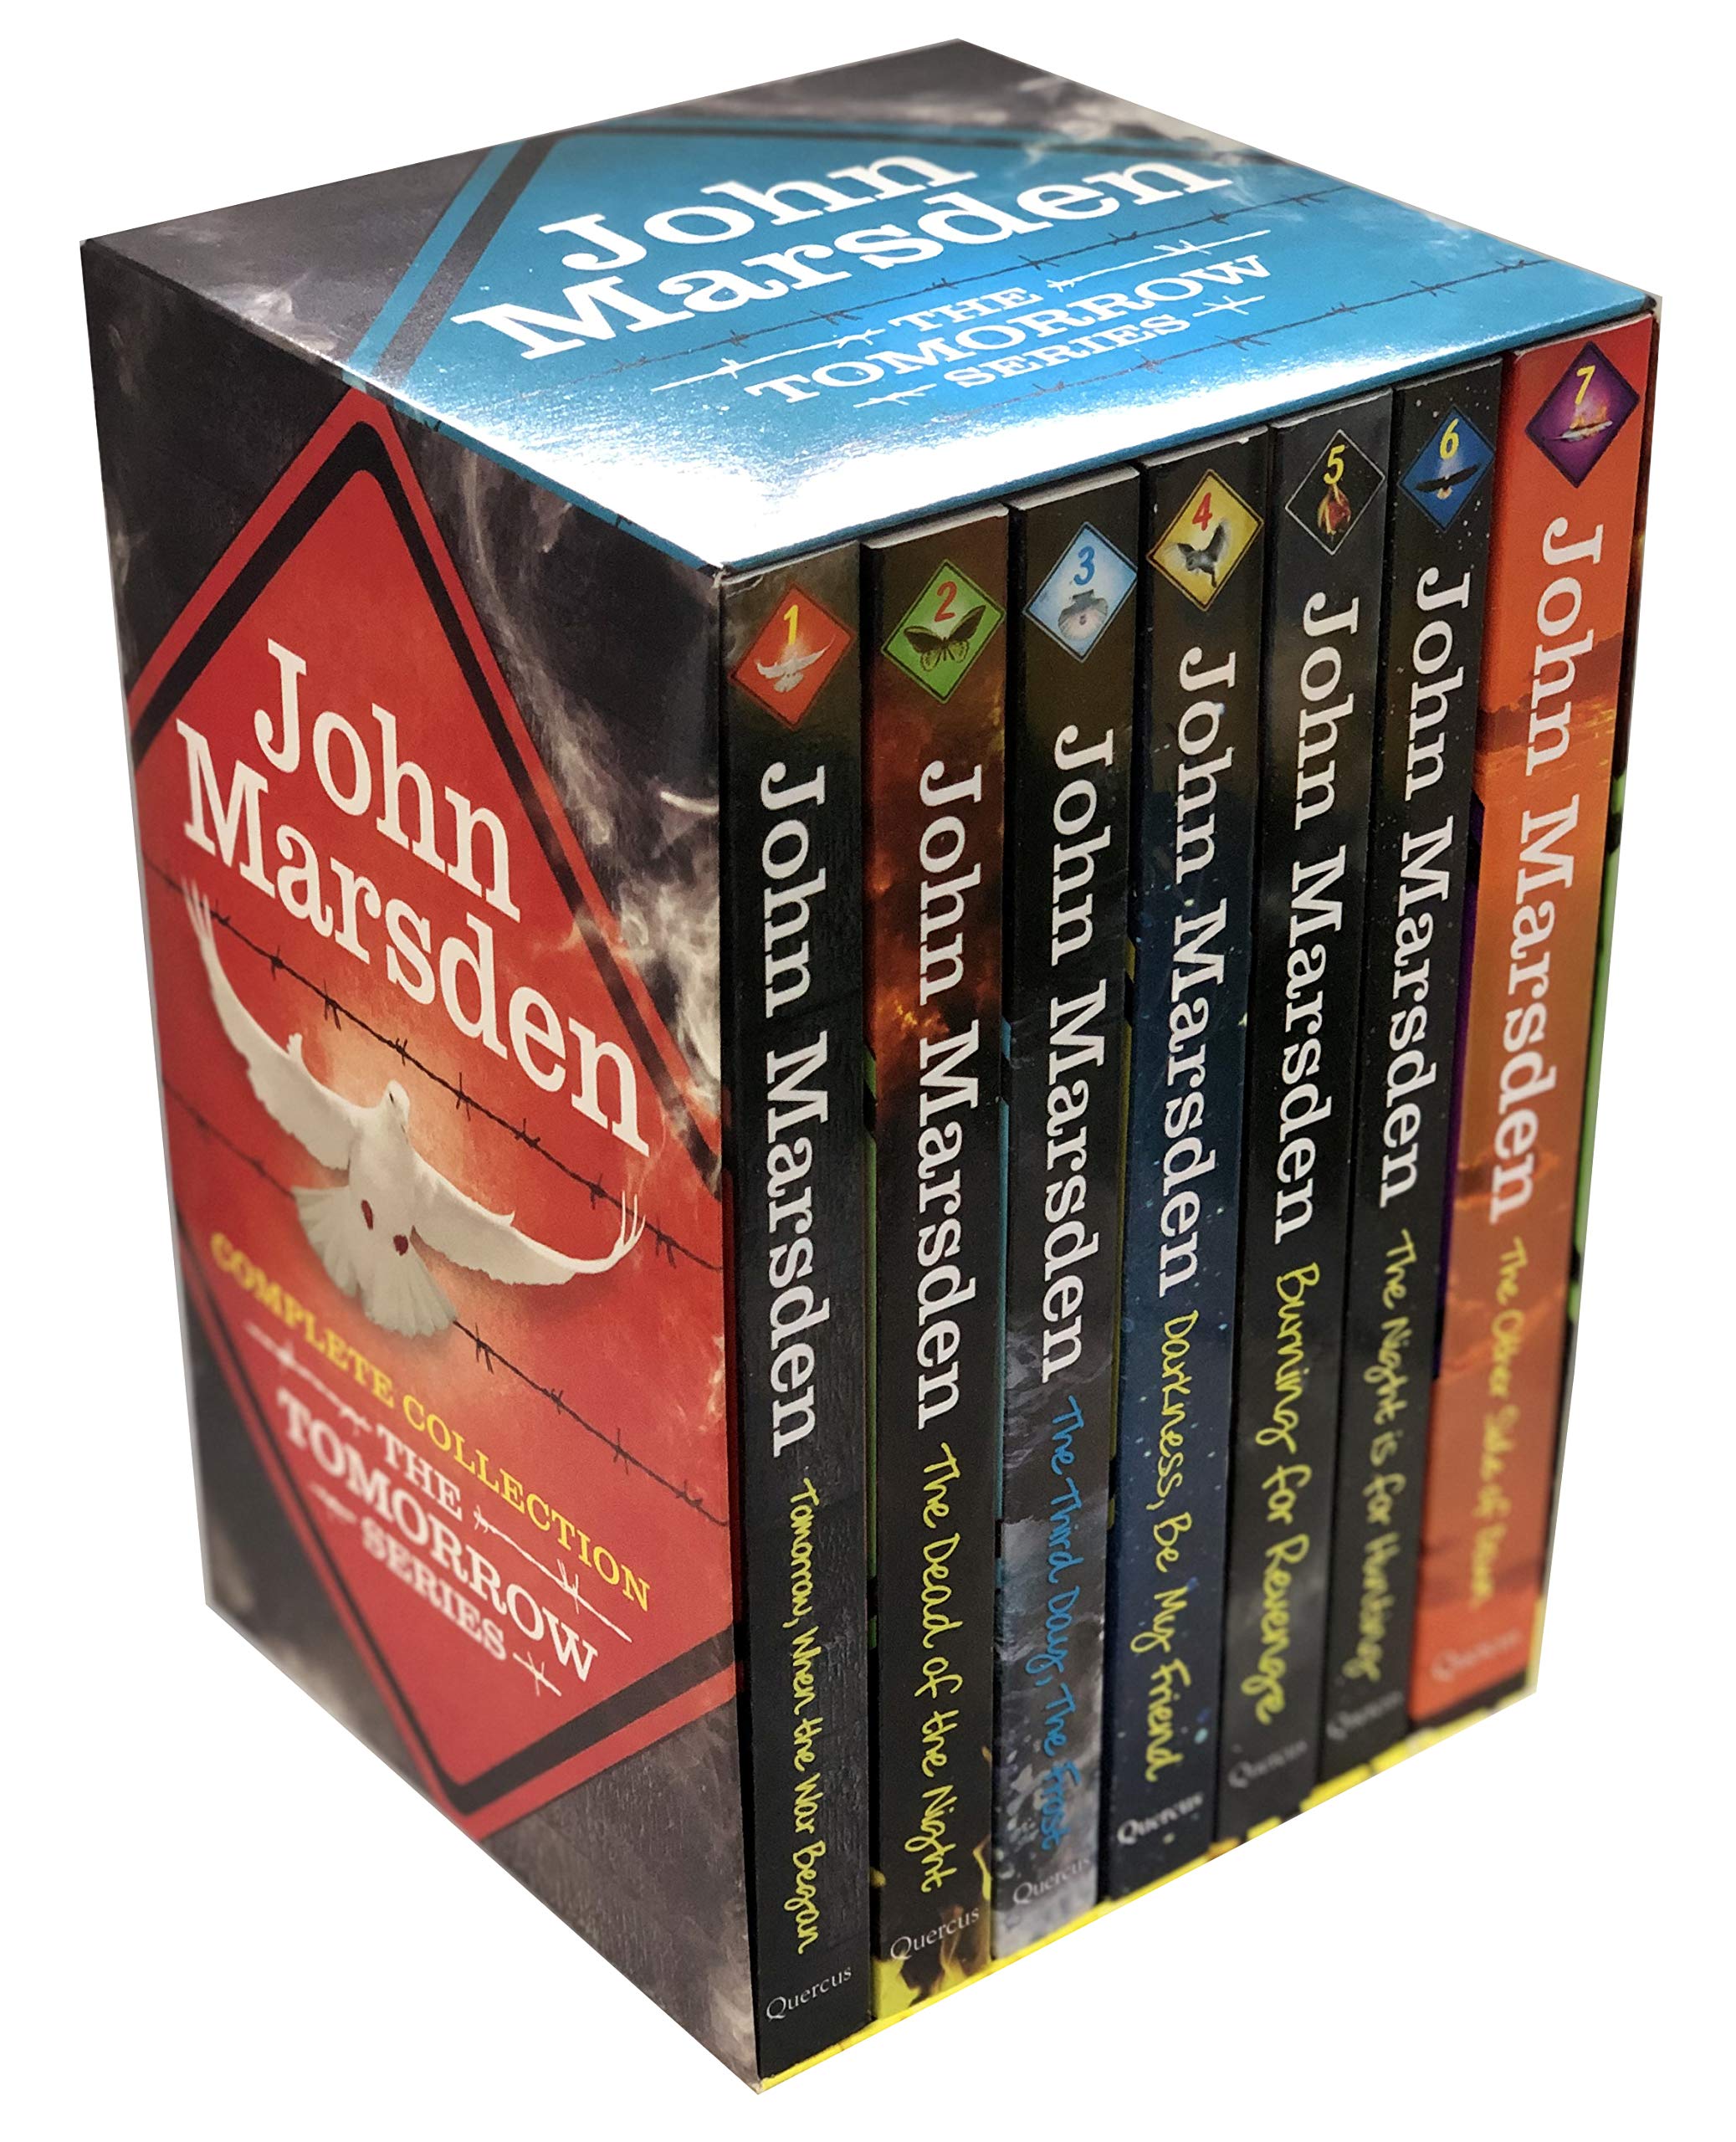 John Marsden The Tomorrow Series 7 Books Collection Set The Dead of the Night - Lets Buy Books